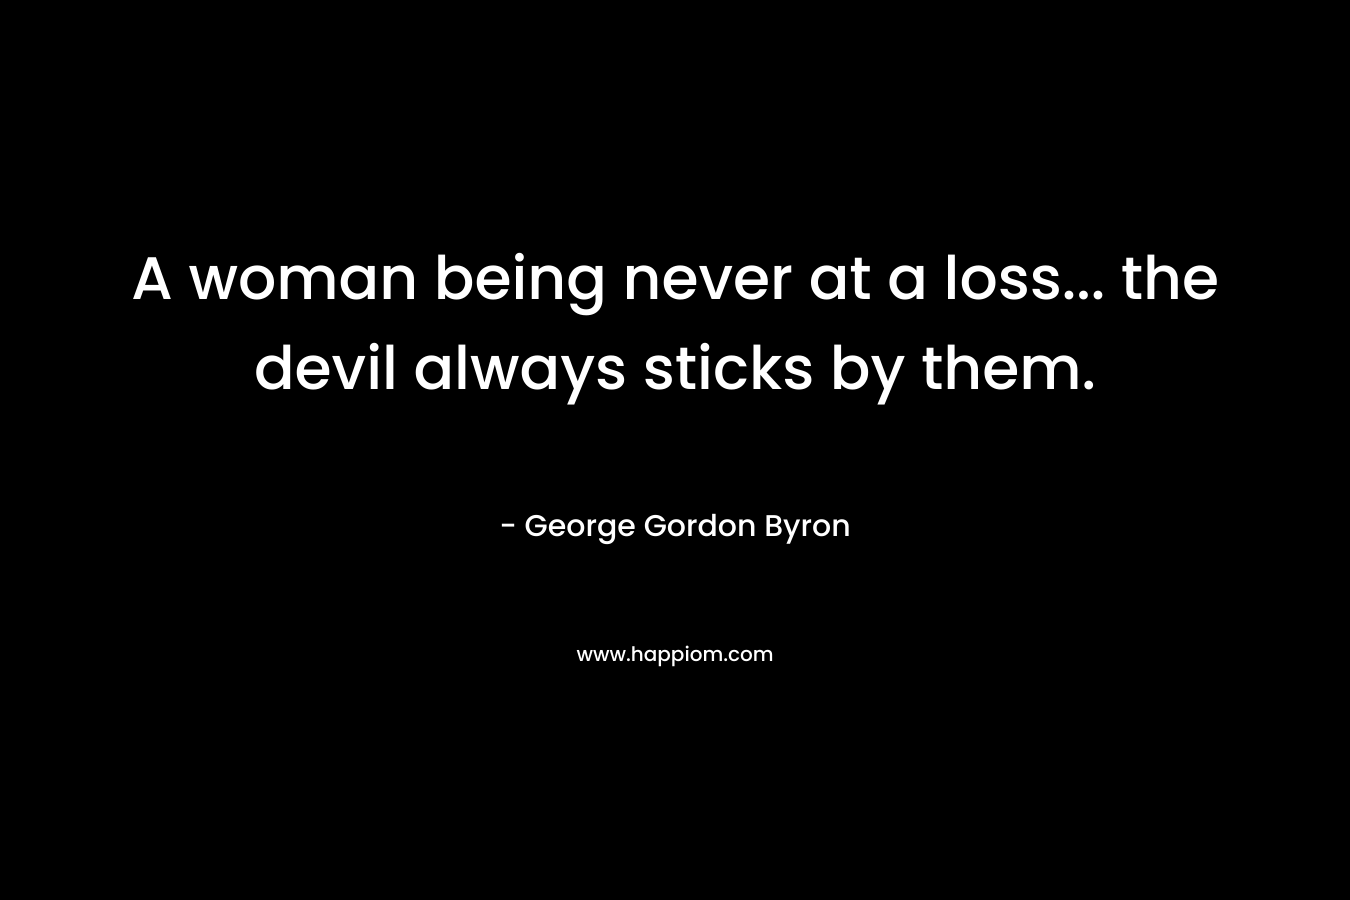 A woman being never at a loss... the devil always sticks by them.